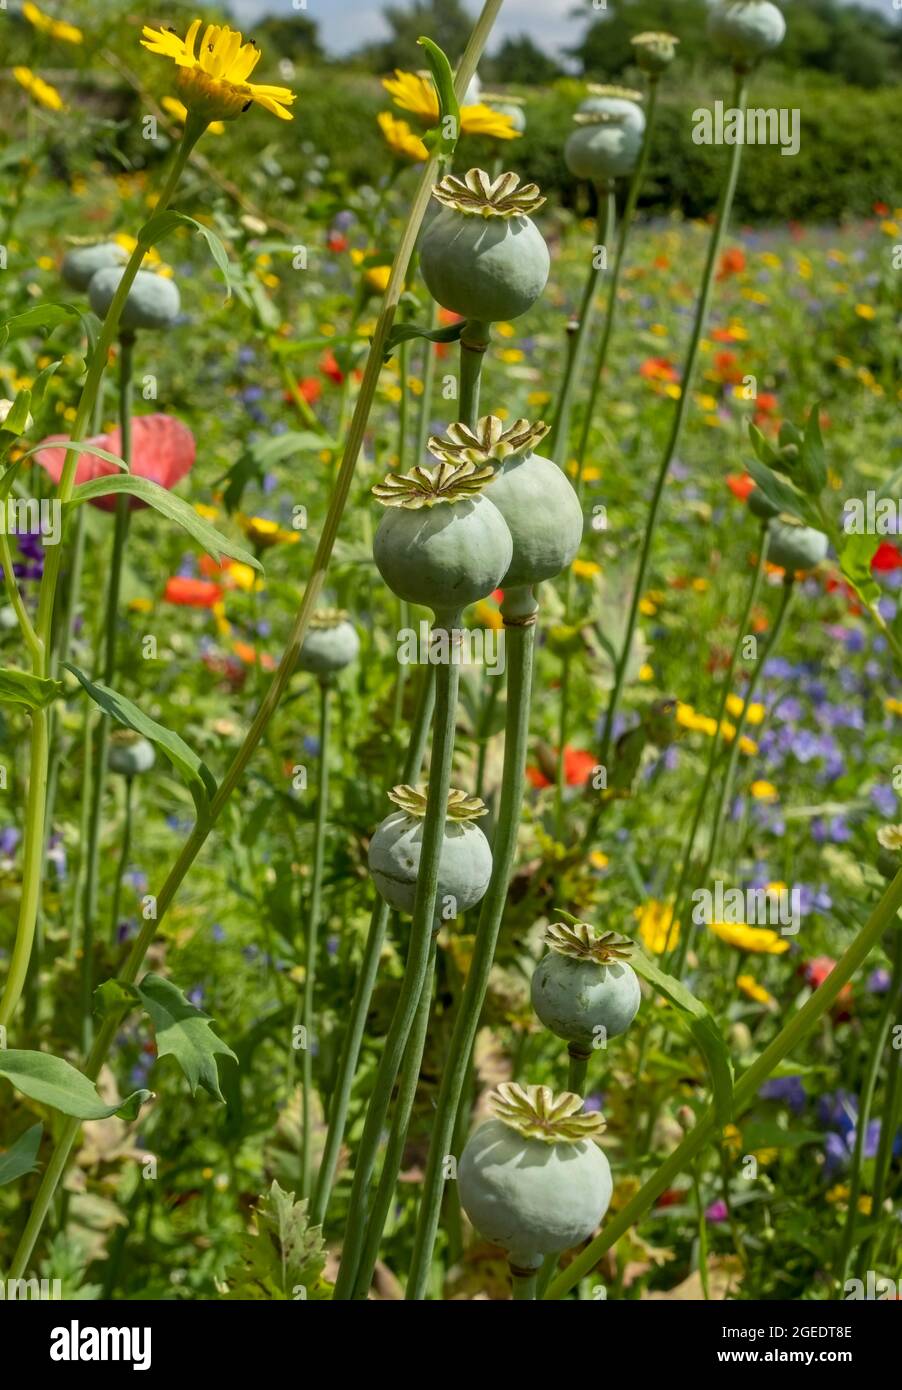 Close up of poppy seedheads poppies wildflowers wild flowers in a garden border flowerbed in summer England UK United Kingdom GB Great Britain Stock Photo